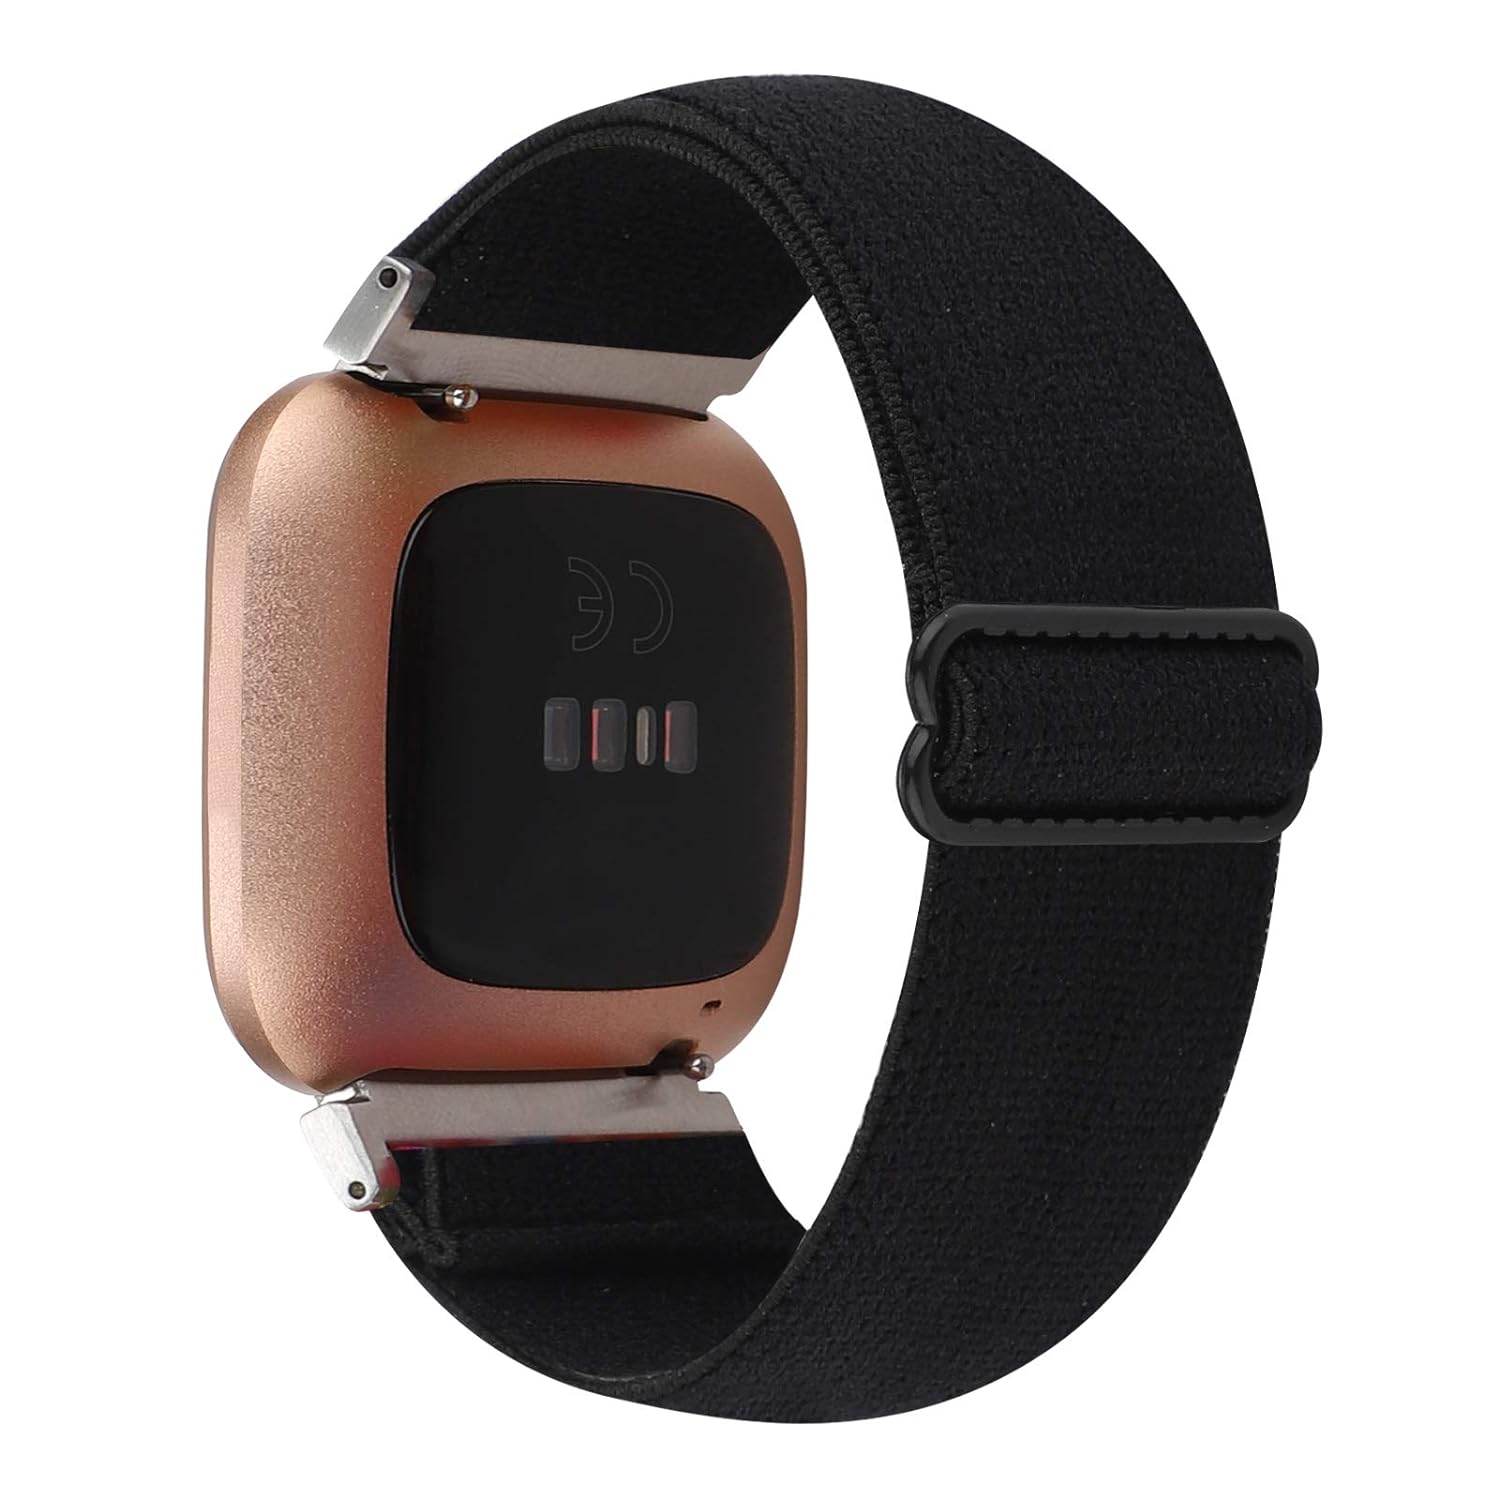 Adjustment Elastic Watch Band Compatible with Fitbit Versa/Versa 2/Versa Lite Special Edition for Women Men Nylon Stretchy Strap Wristband for Fitbit Versa Smart Watch